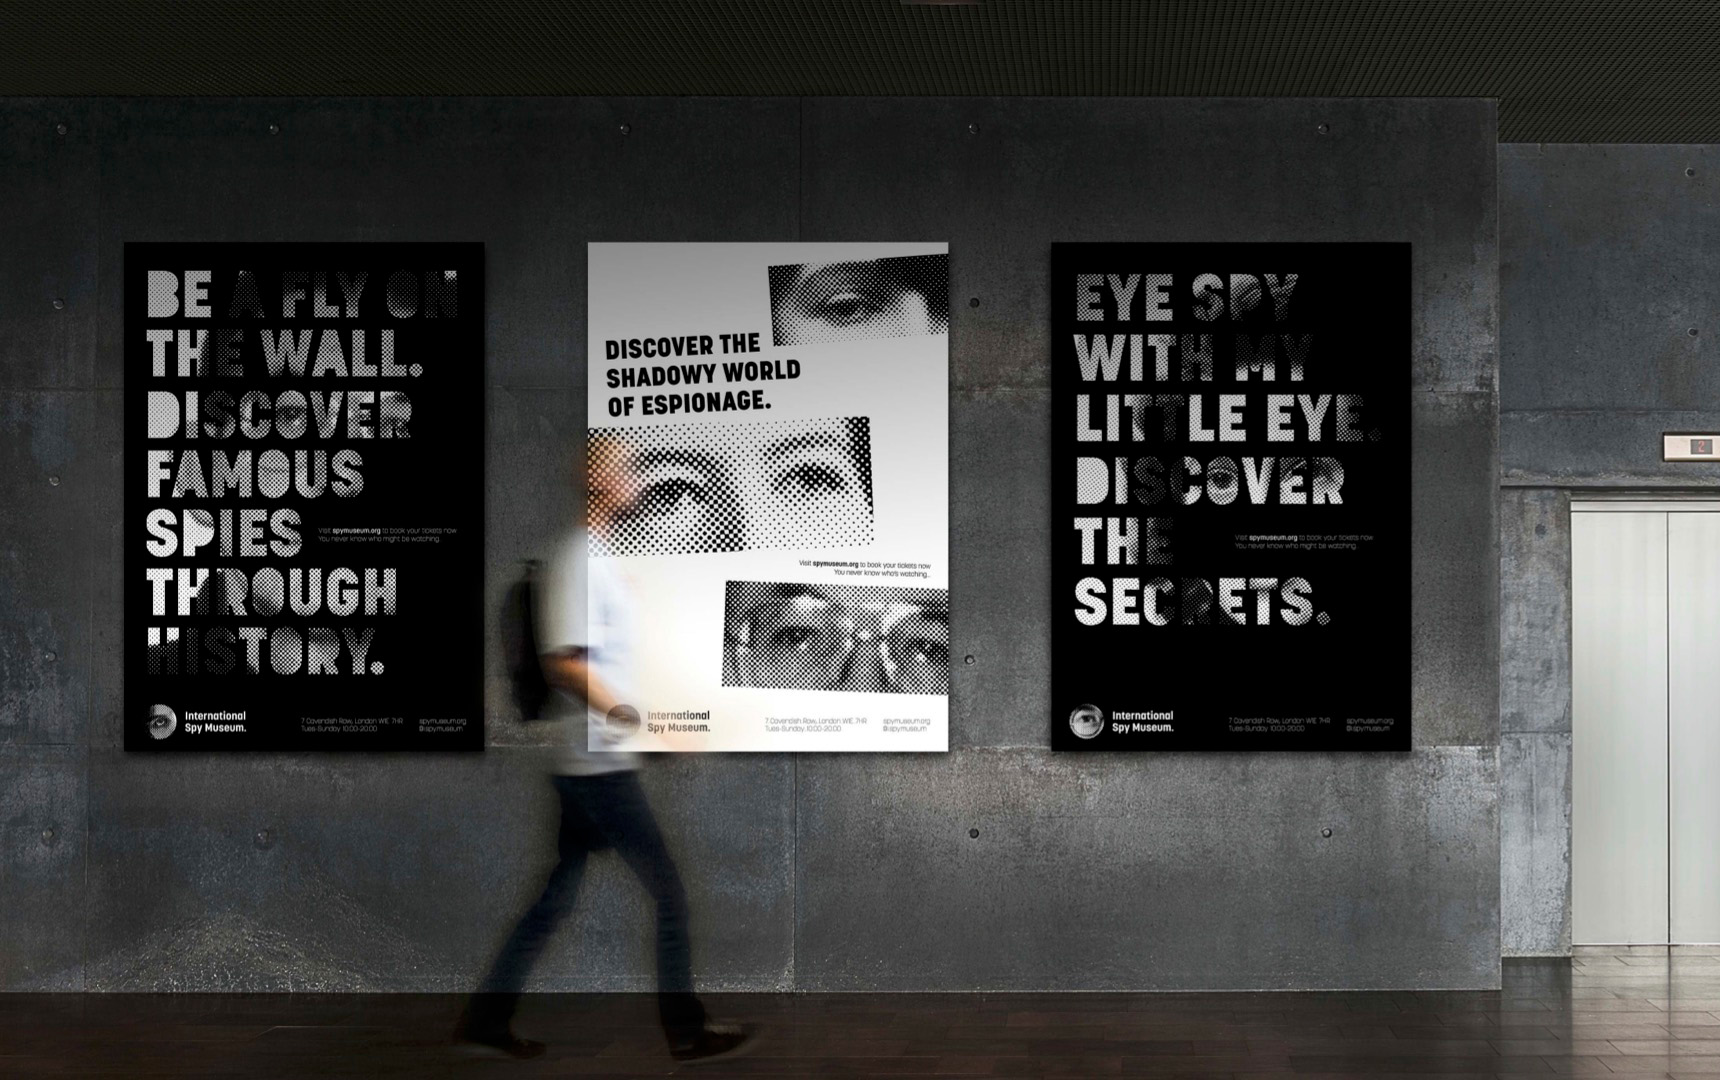 Three posters shown in context on a dark grey wall, showcasing the museum and specific exhibitions.